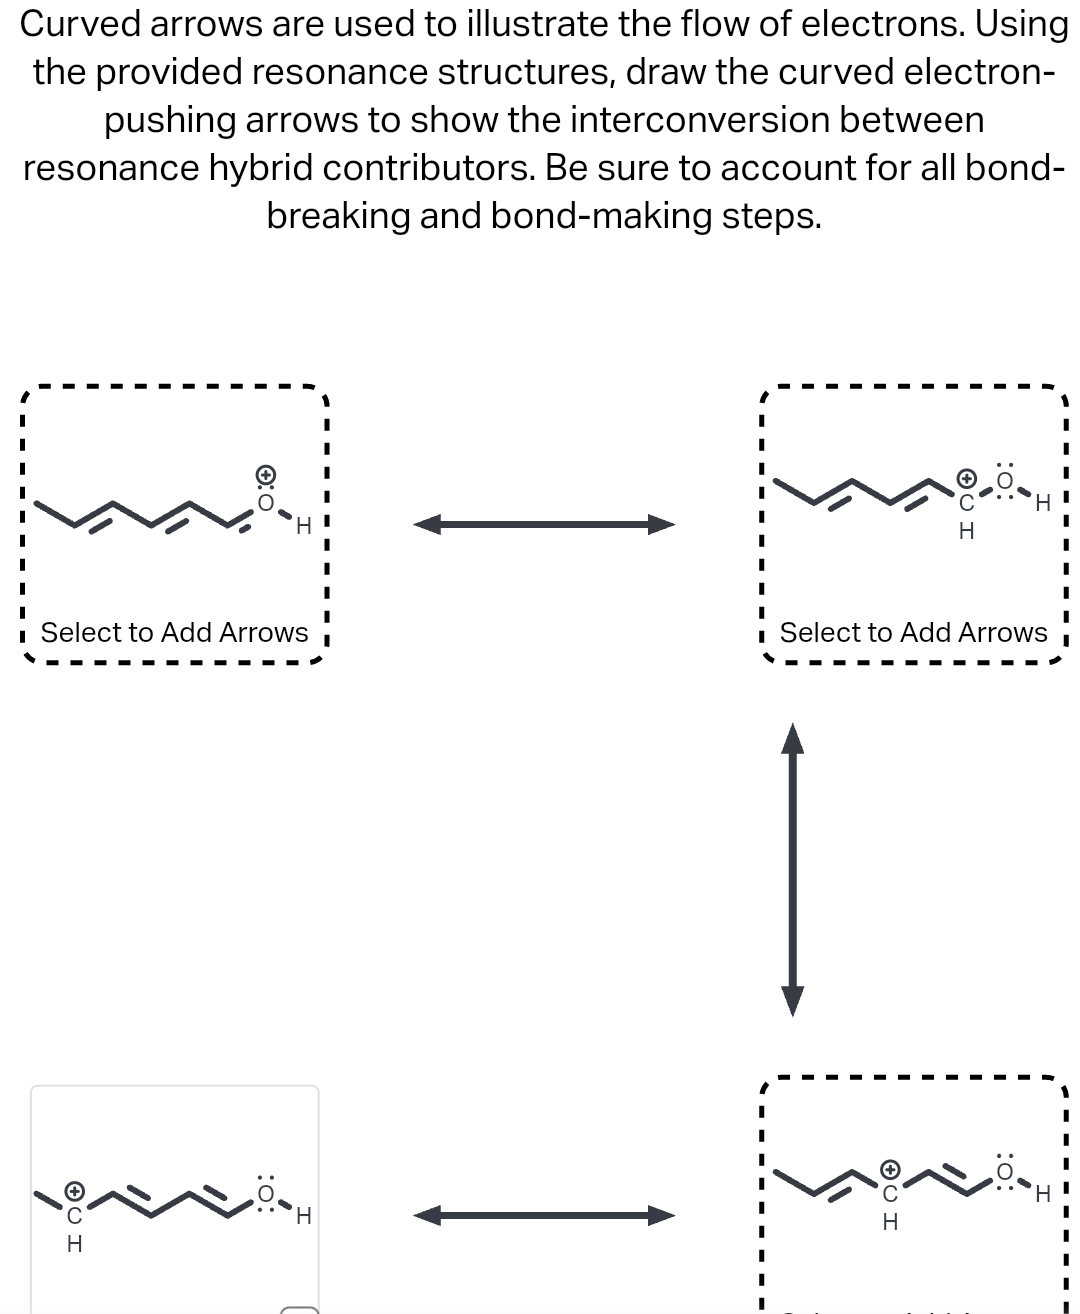 Curved arrows are used to illustrate the flow of electrons. Using
the provided resonance structures, draw the curved electron-
pushing arrows to show the interconversion between
resonance hybrid contributors. Be sure to account for all bond-
breaking and bond-making steps.
0:0
11
Select to Add Arrows
ISO
H
'Н
■ Select to Add Arrows
U
H
H